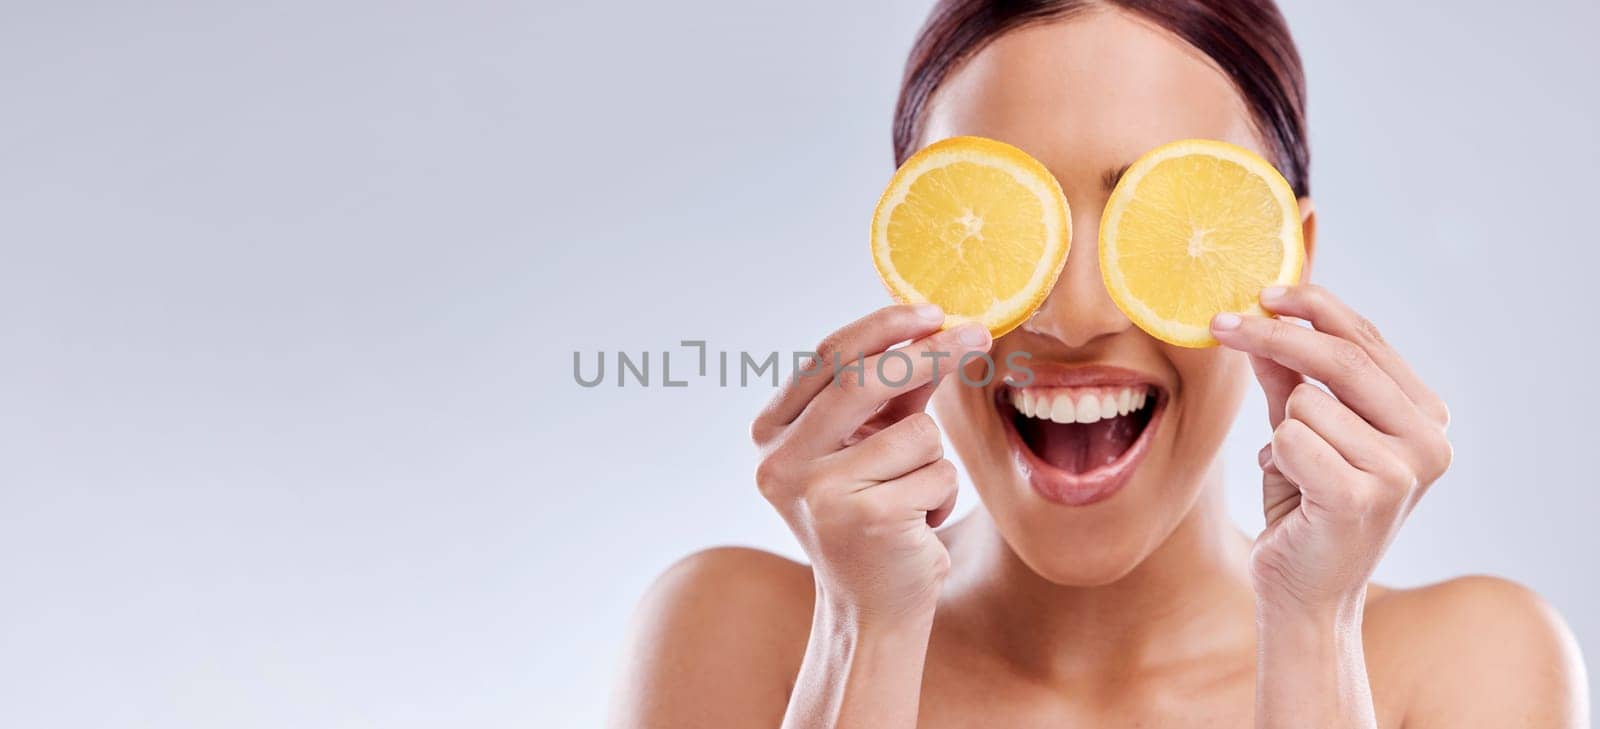 Skincare, mockup or happy woman with orange as natural facial with citrus or vitamin c for wellness. Studio background, smile or healthy girl model smiling with organic fruits for dermatology beauty by YuriArcurs